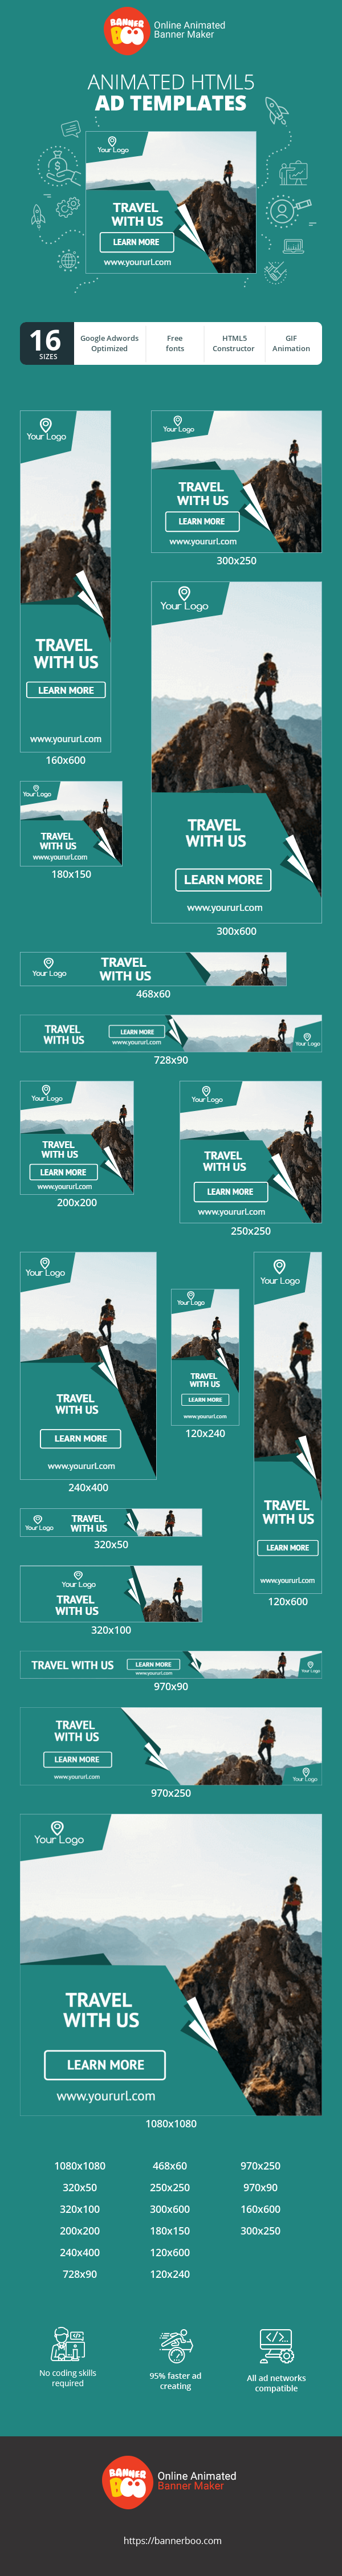 Banner ad template — Travel With Us!